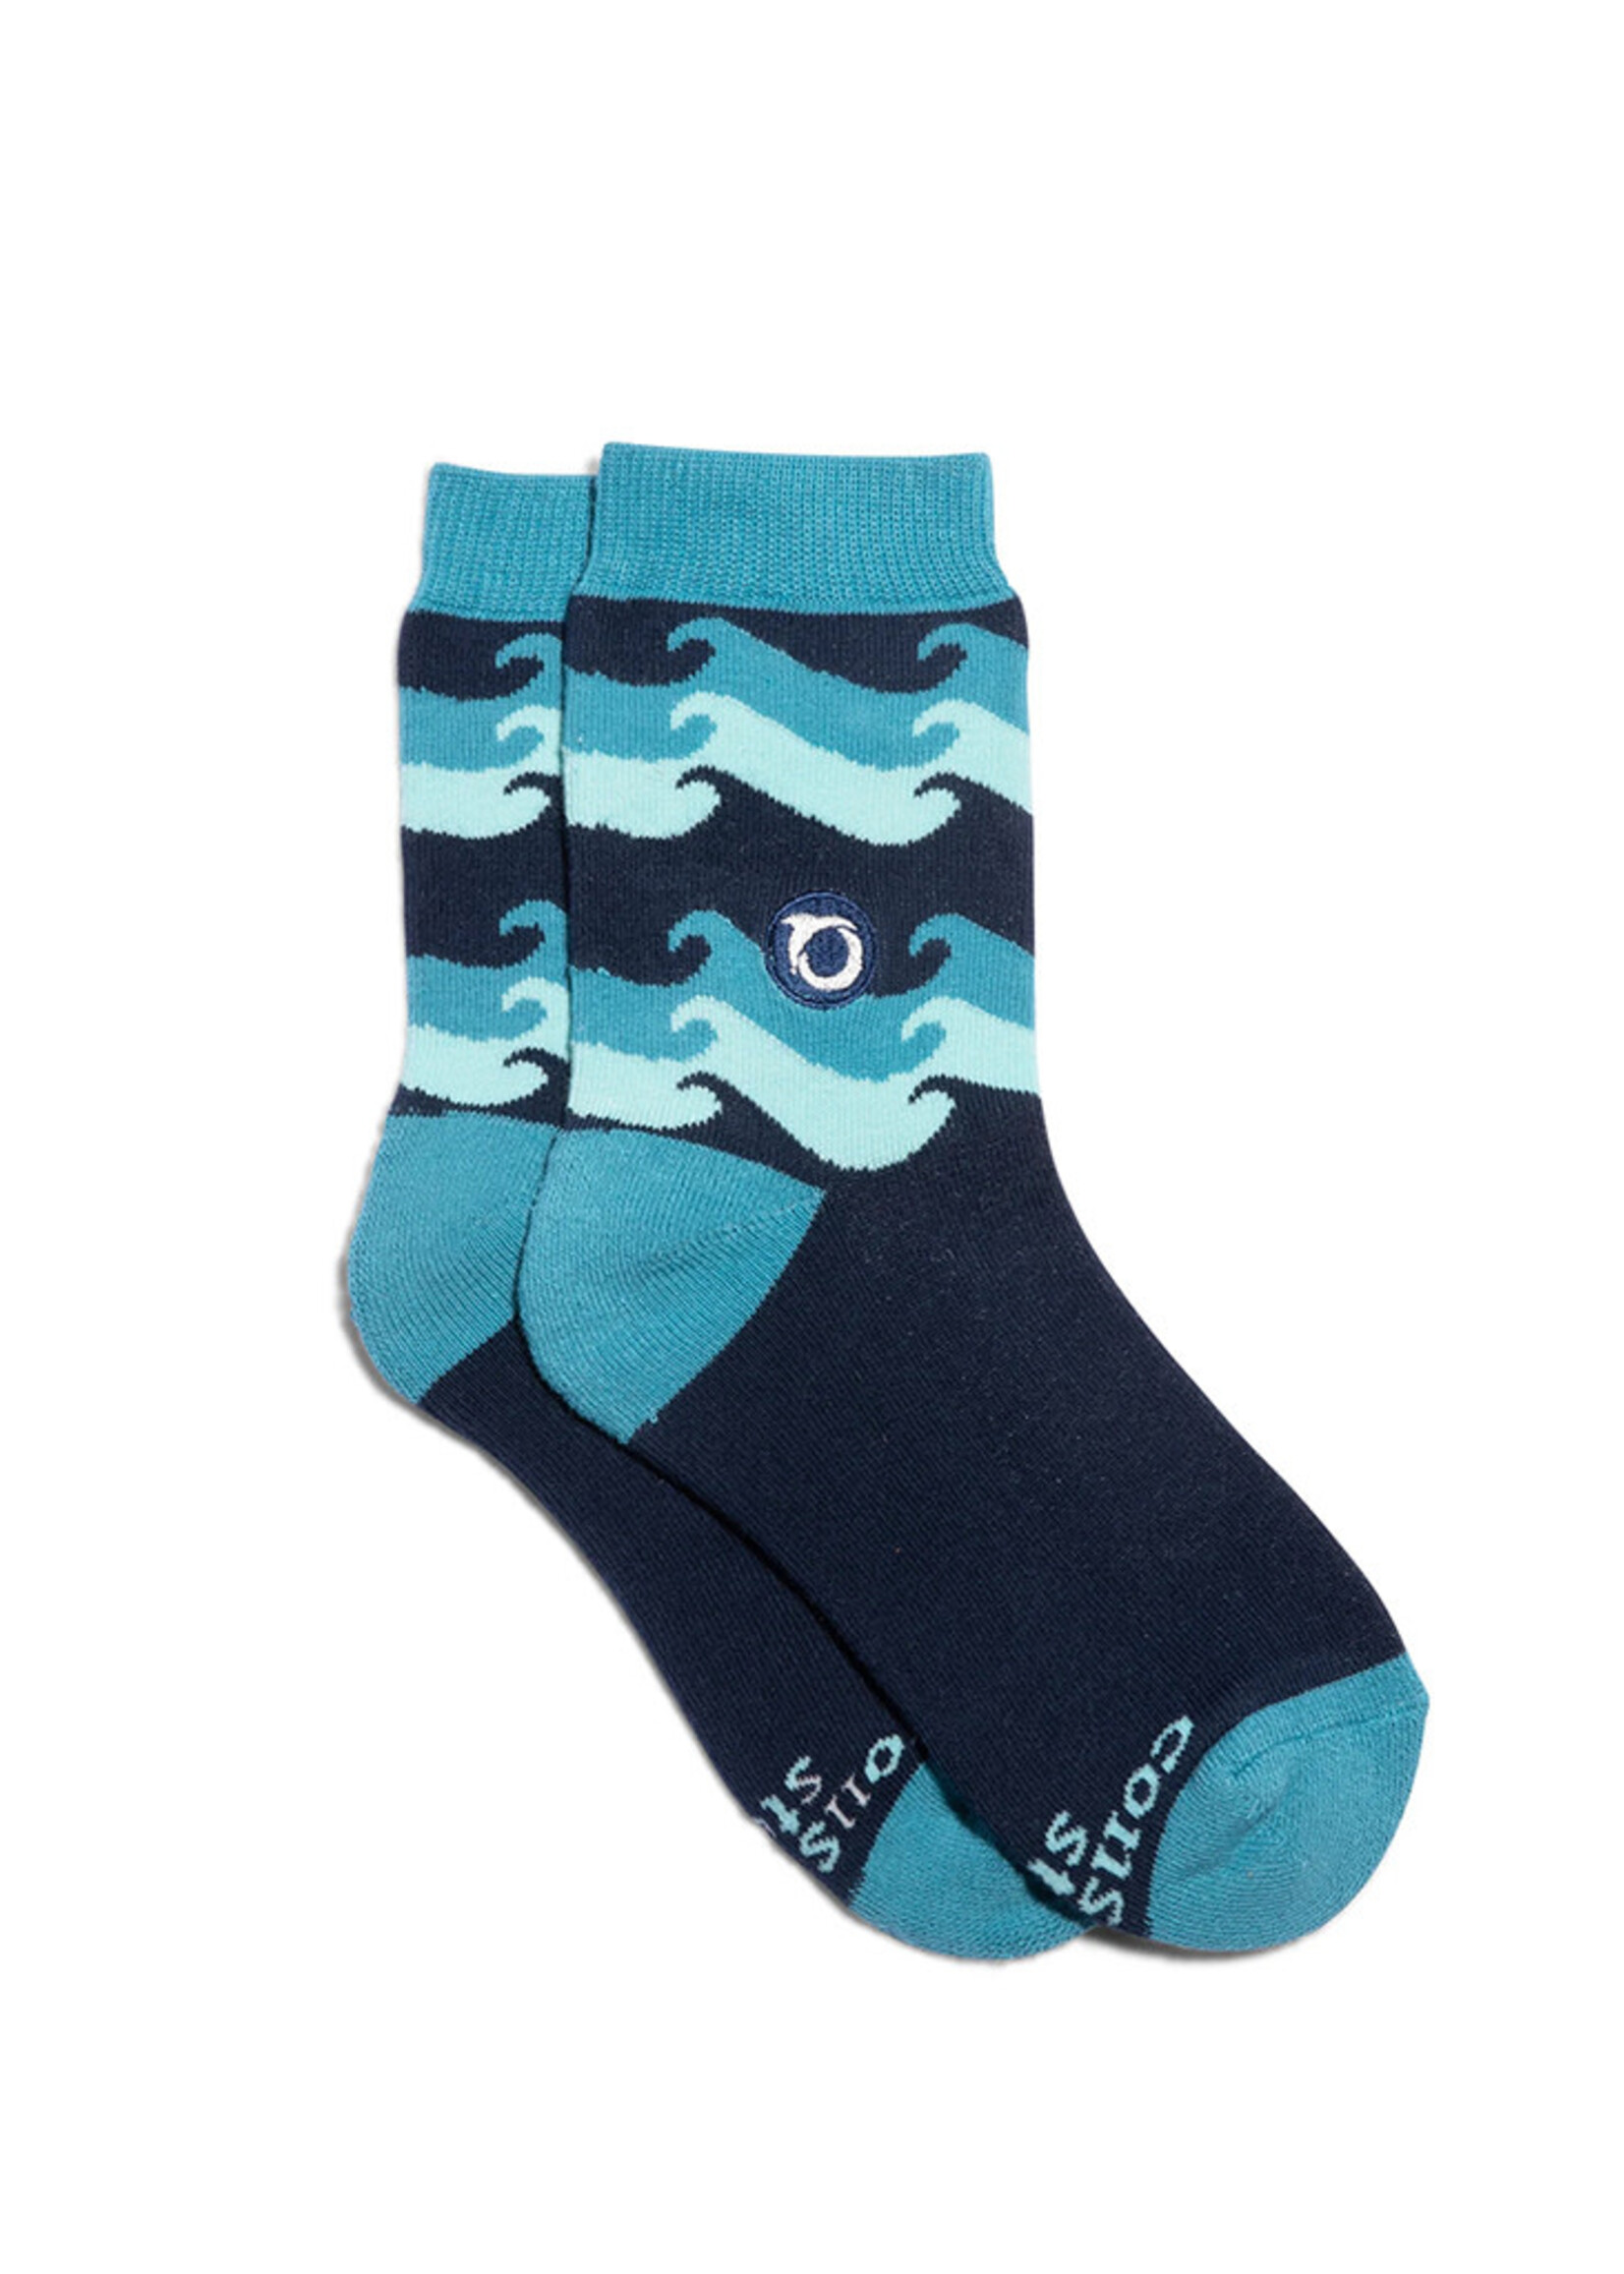 Conscious Step Kids Socks that Protect Oceans - Youth